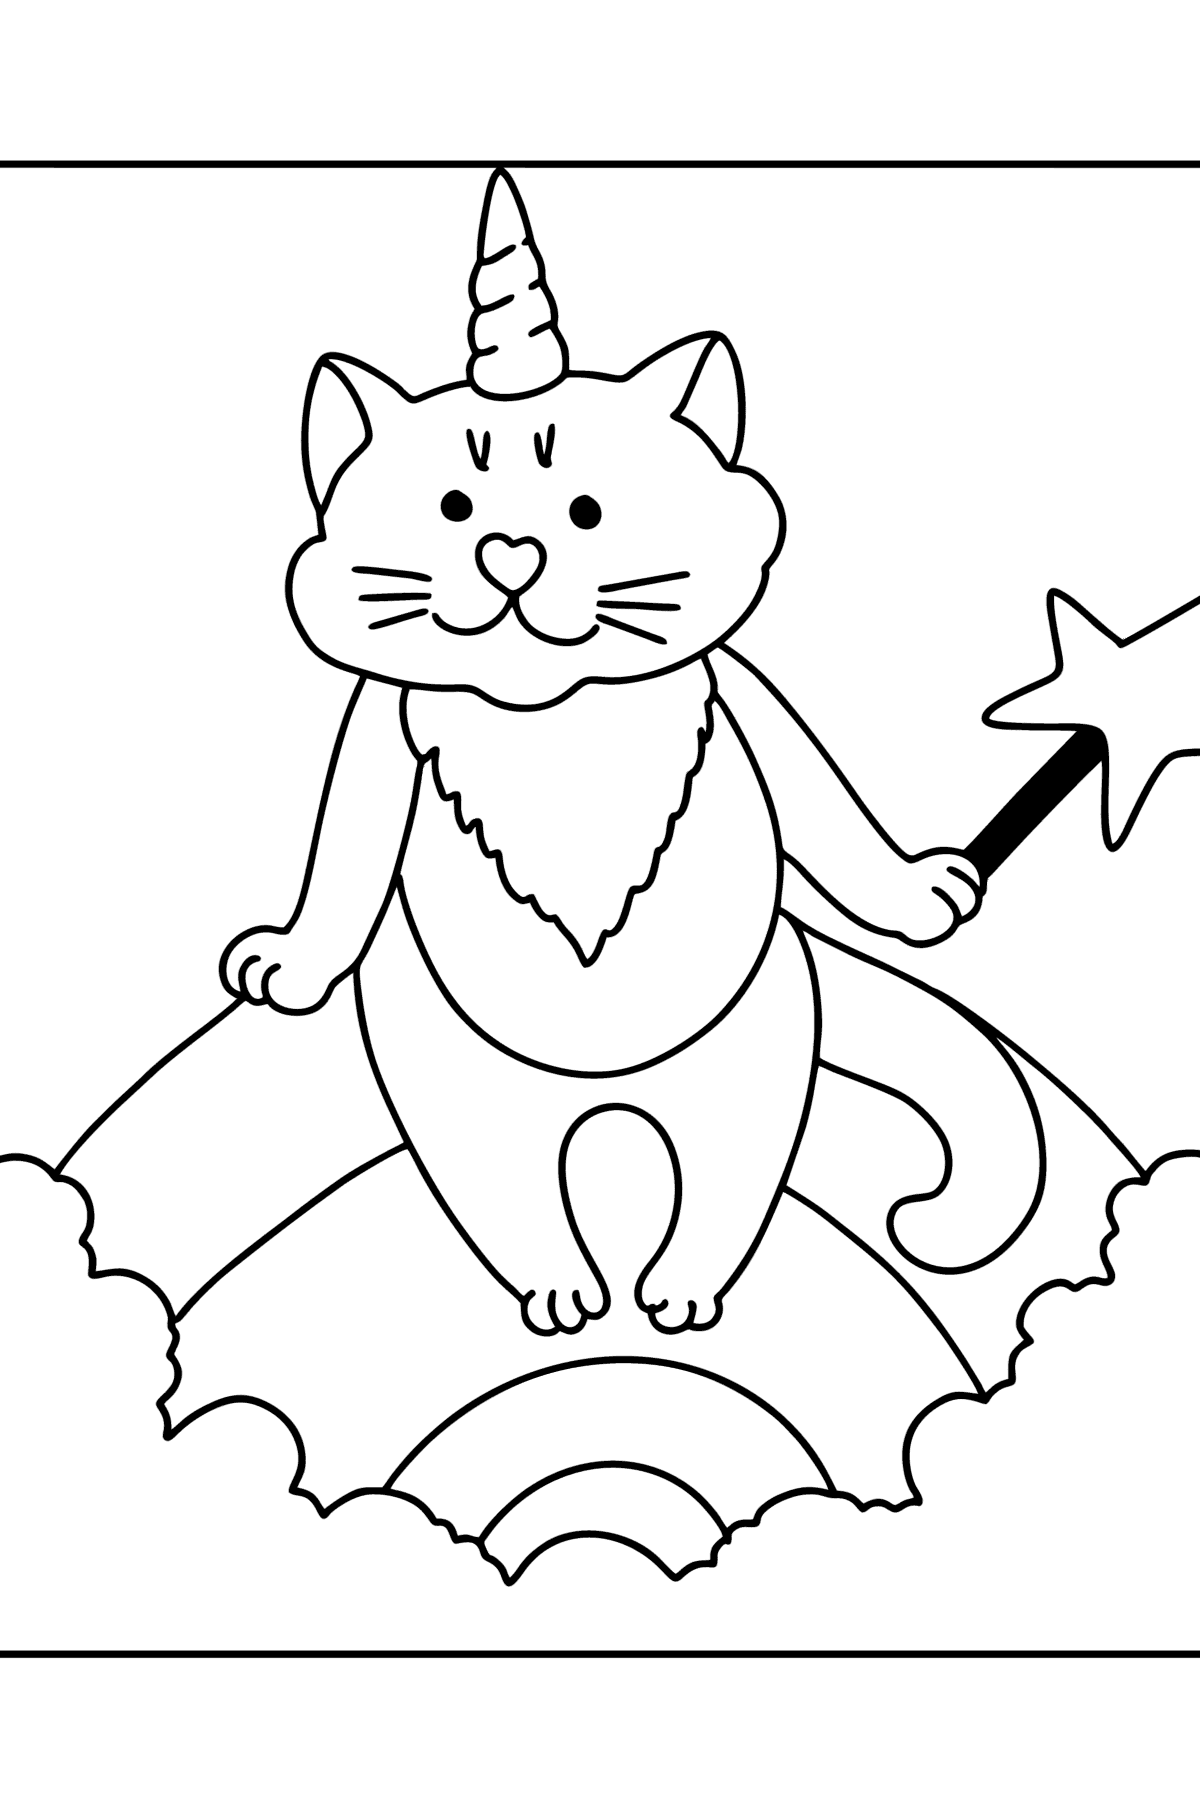 Kitten Unicorn coloring page - Coloring Pages for Kids